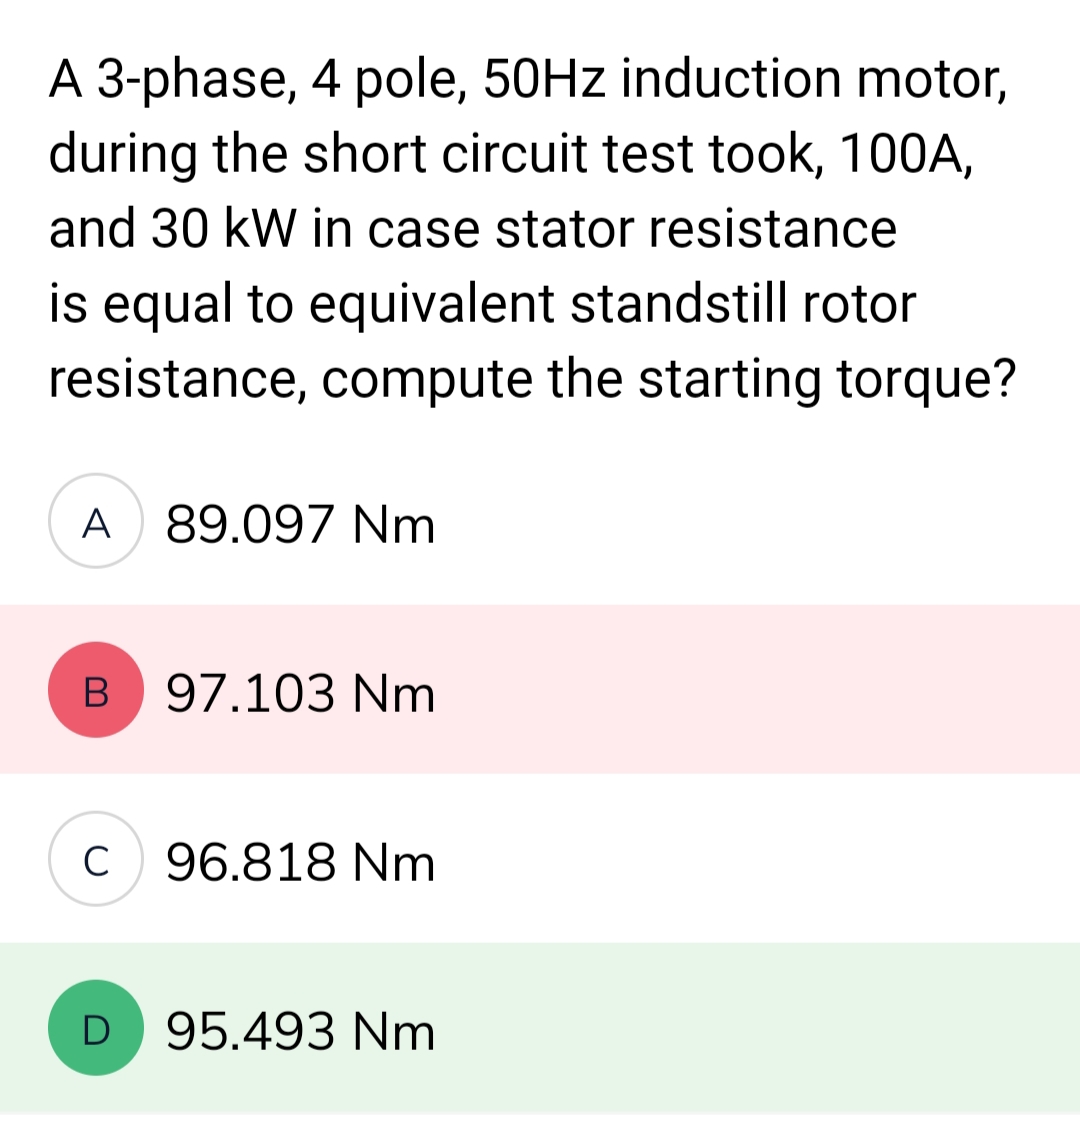 A 3-phase, 4 pole, 50Hz induction motor,
during the short circuit test took, 100A,
and 30 kW in case stator resistance
is equal to equivalent standstill rotor
resistance, compute the starting torque?
A 89.097 Nm
B
C
D
97.103 Nm
96.818 Nm
95.493 Nm